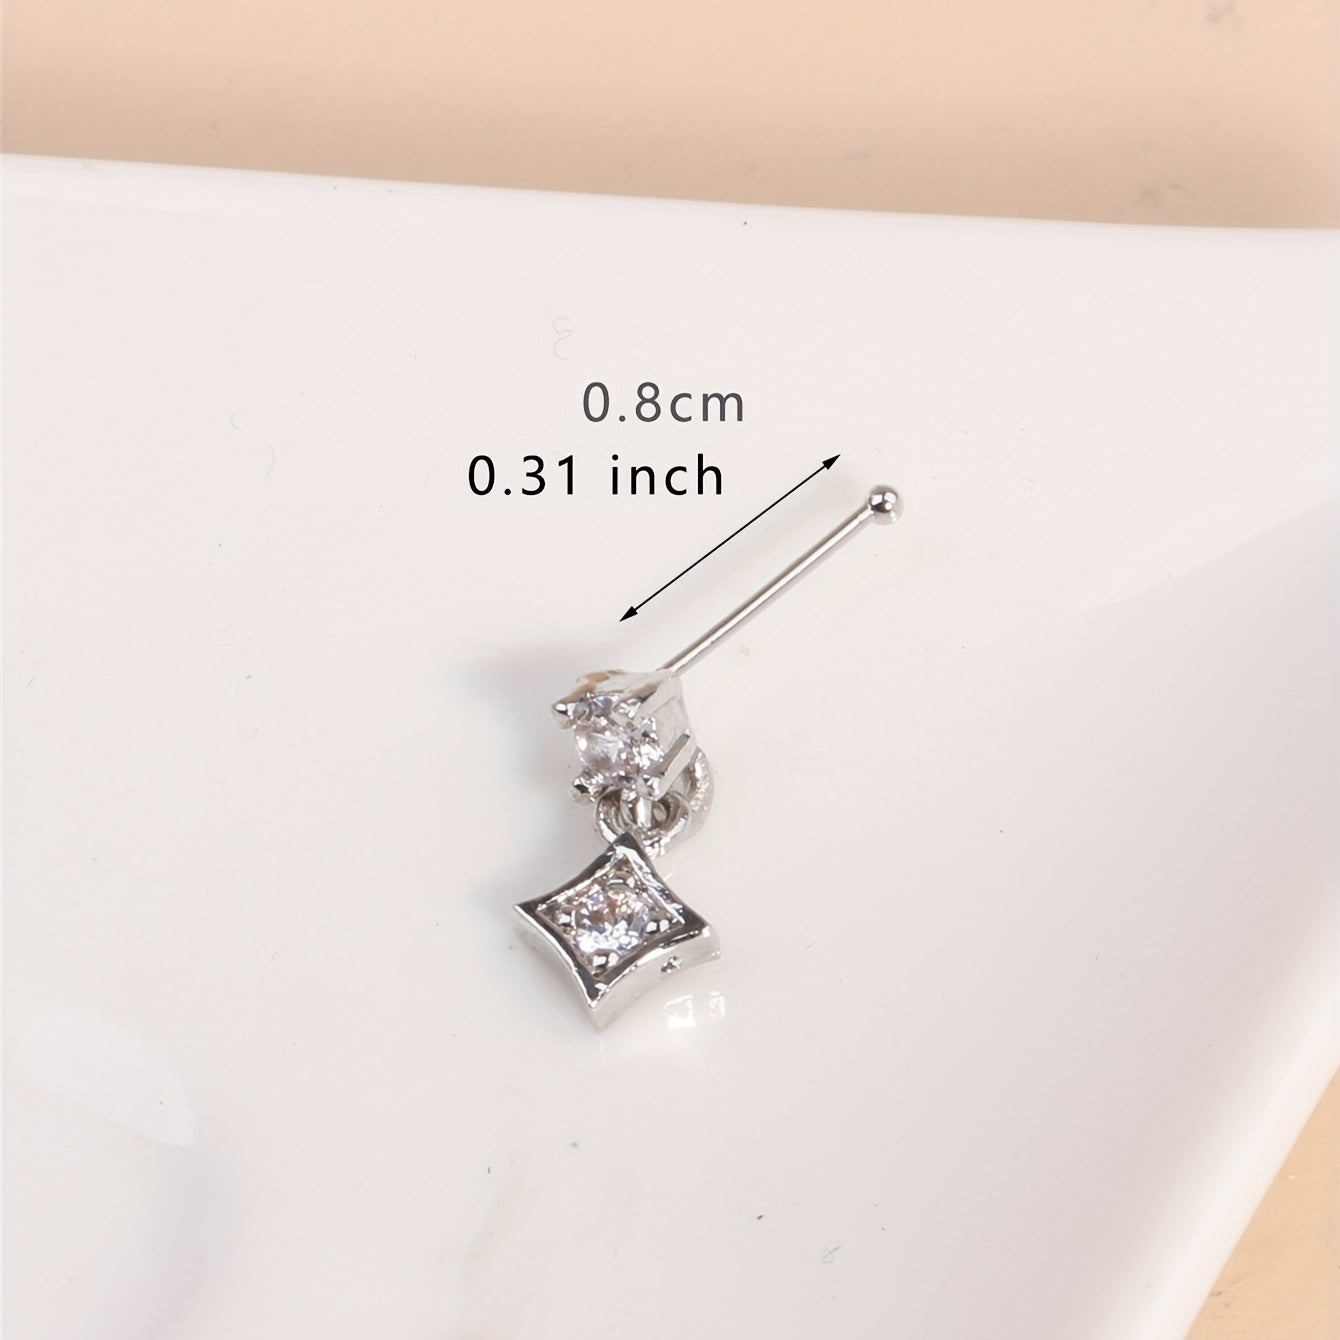 Inlaid Square Shape Zircon Pendant Nose Stud Ring For Women Body Piercing Jewelry